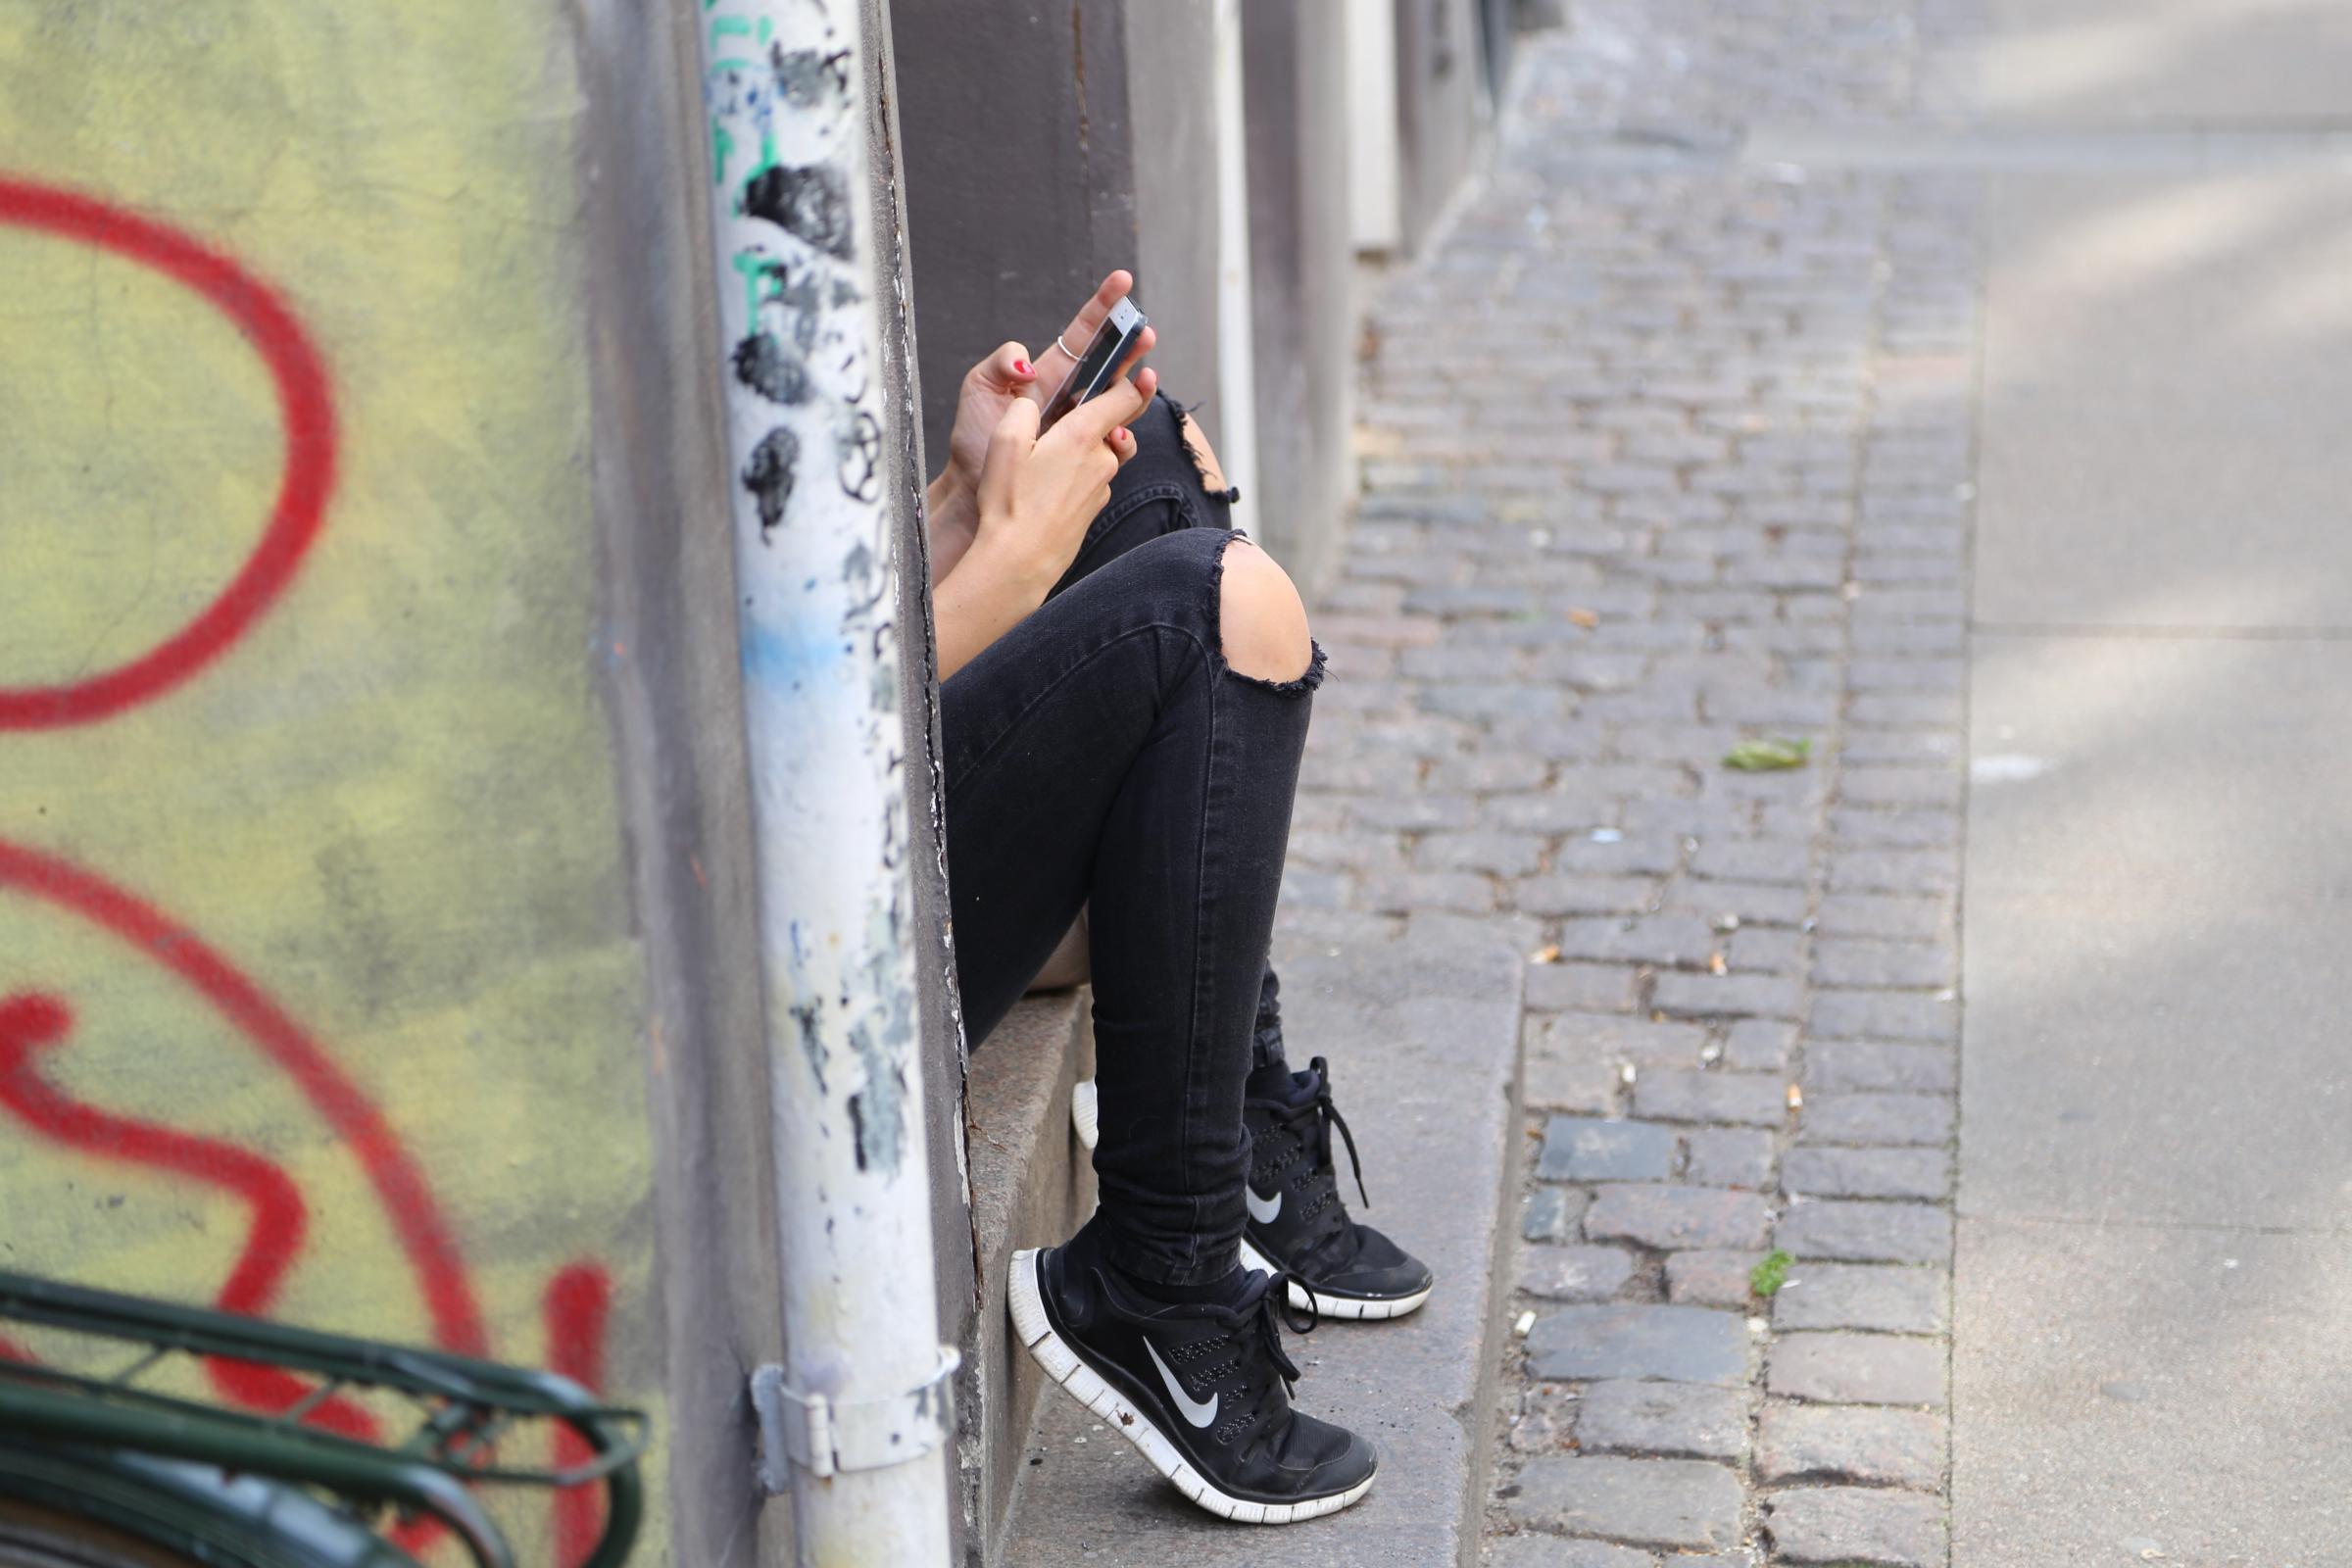 Brett fears teenagers may be retreating into an online world as they are unable to see their friends normally. Photo: Pixabay